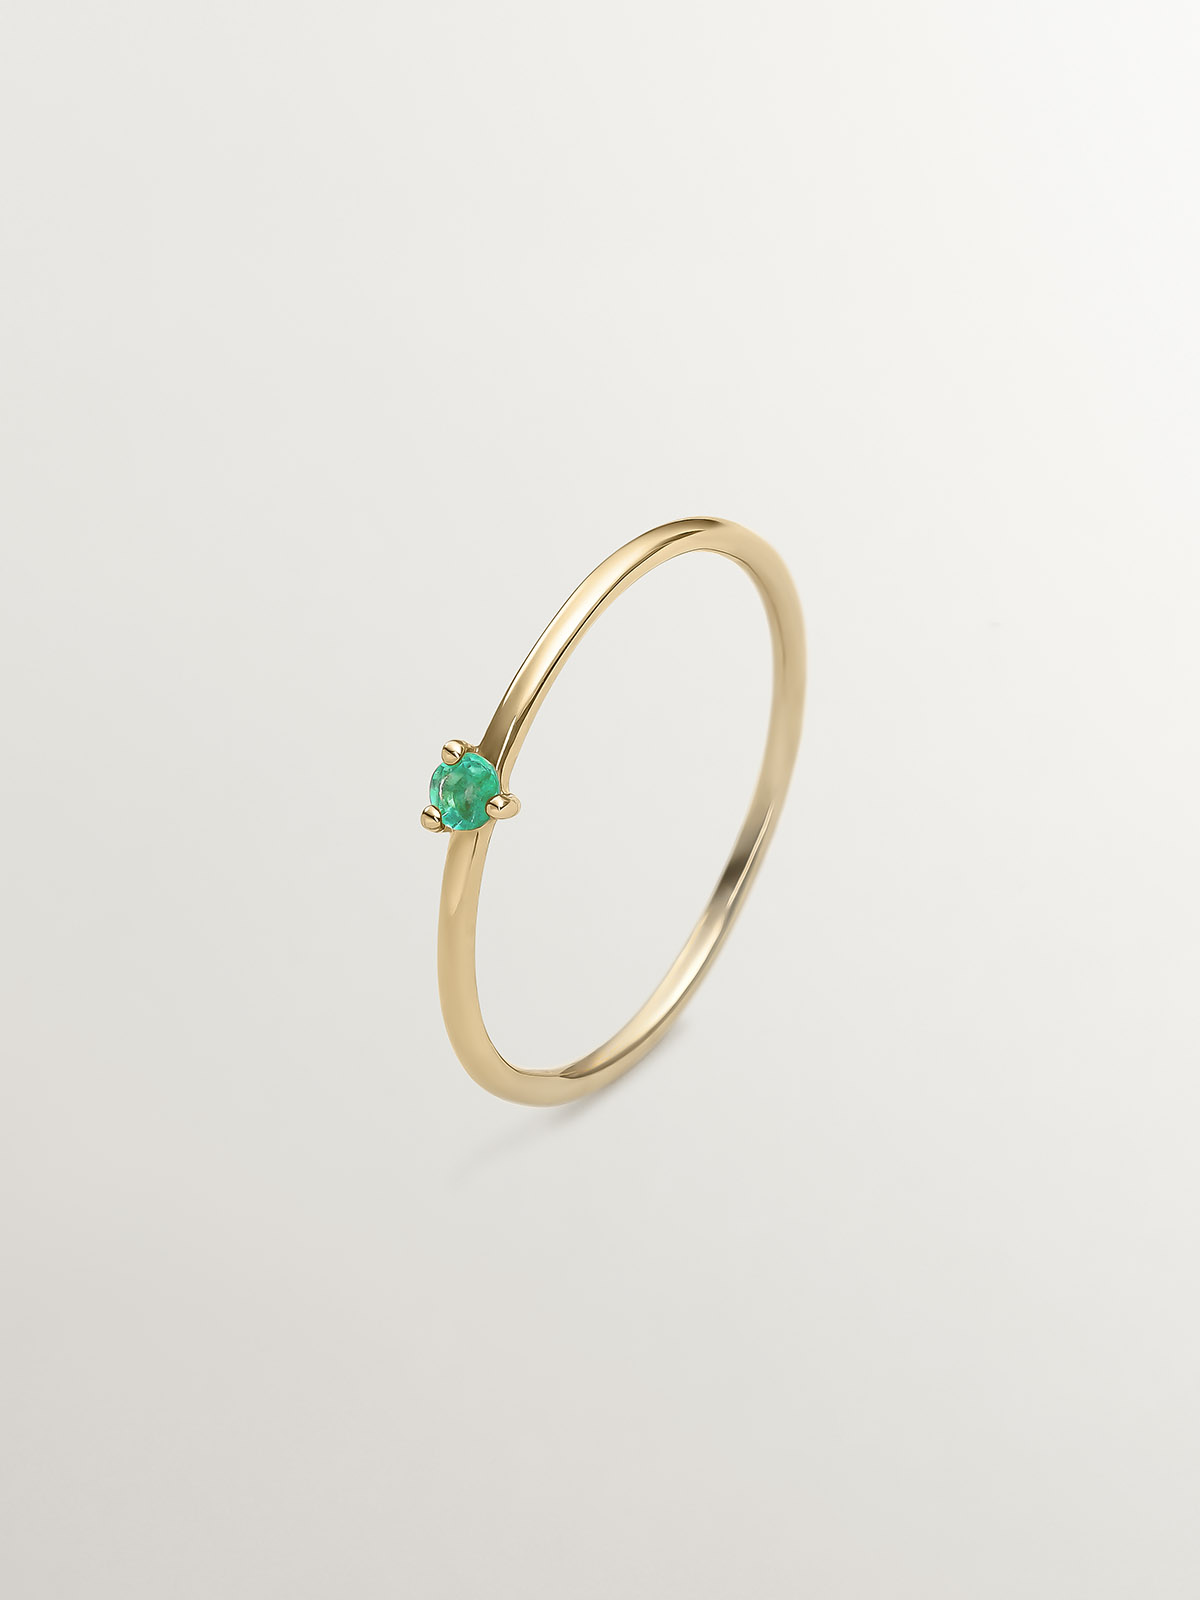 9K Yellow Gold Solitaire Ring with Emerald